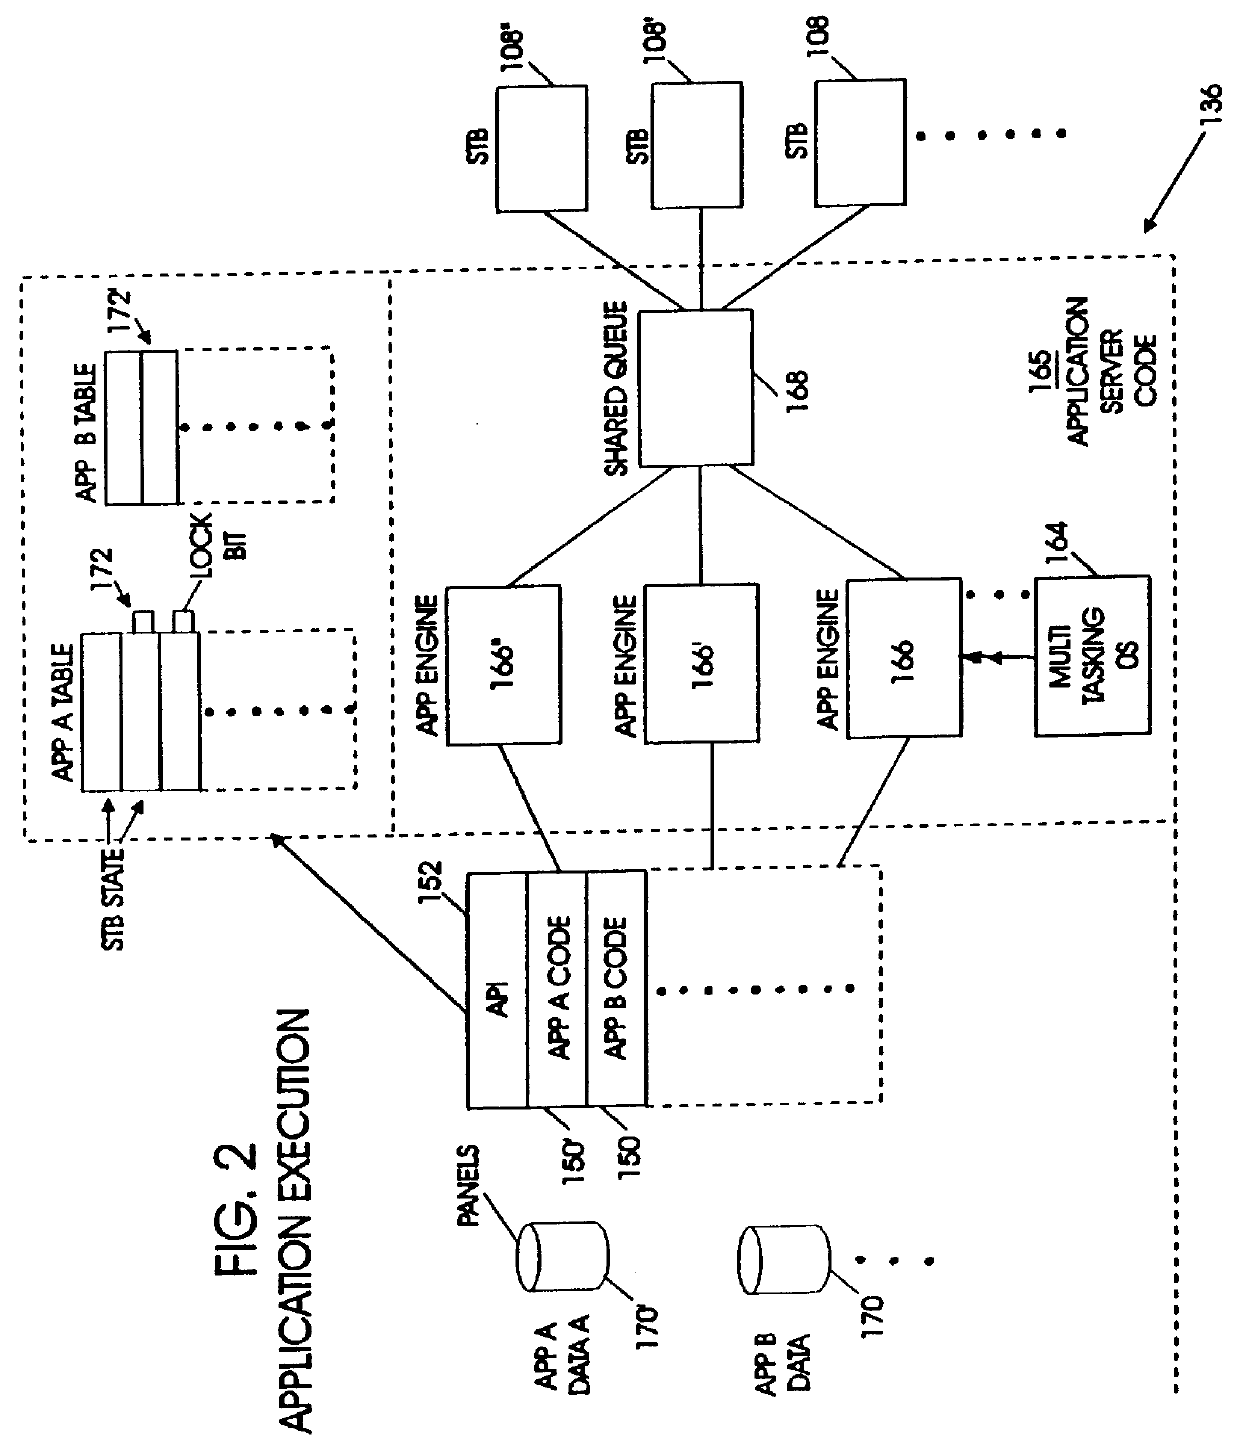 System and method to provide interactivity for a networked video server